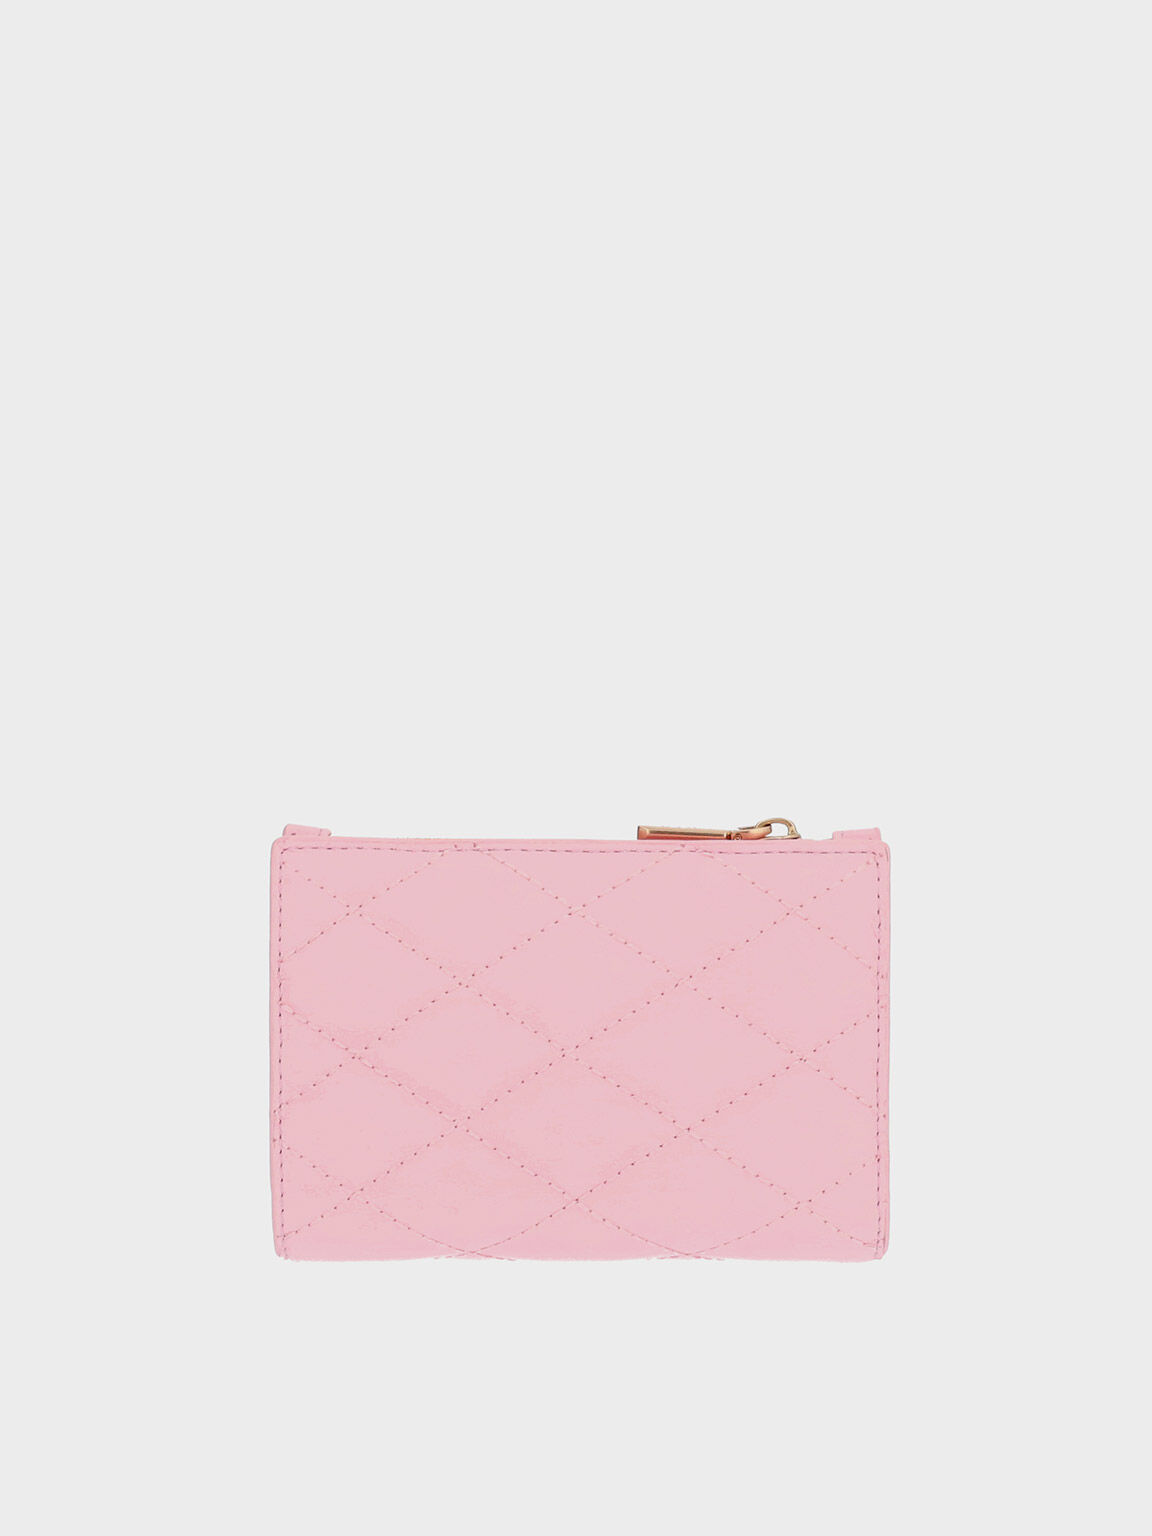 Ví nữ Lillie Quilted Mini, Hồng, hi-res